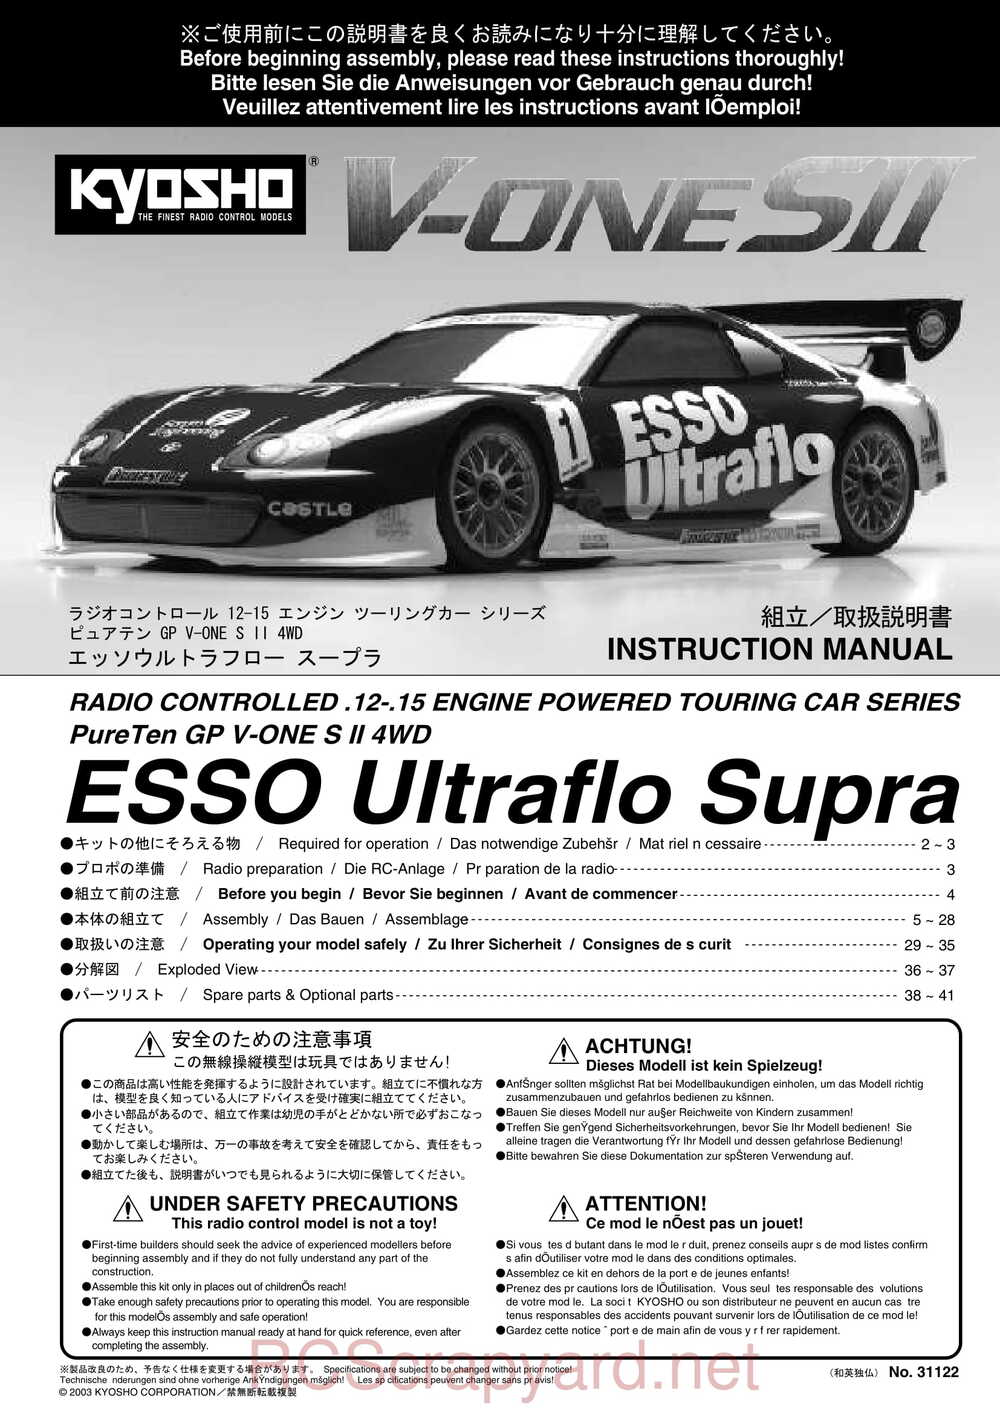 Kyosho - 31122 - V-One S2 - Manual - Page 01